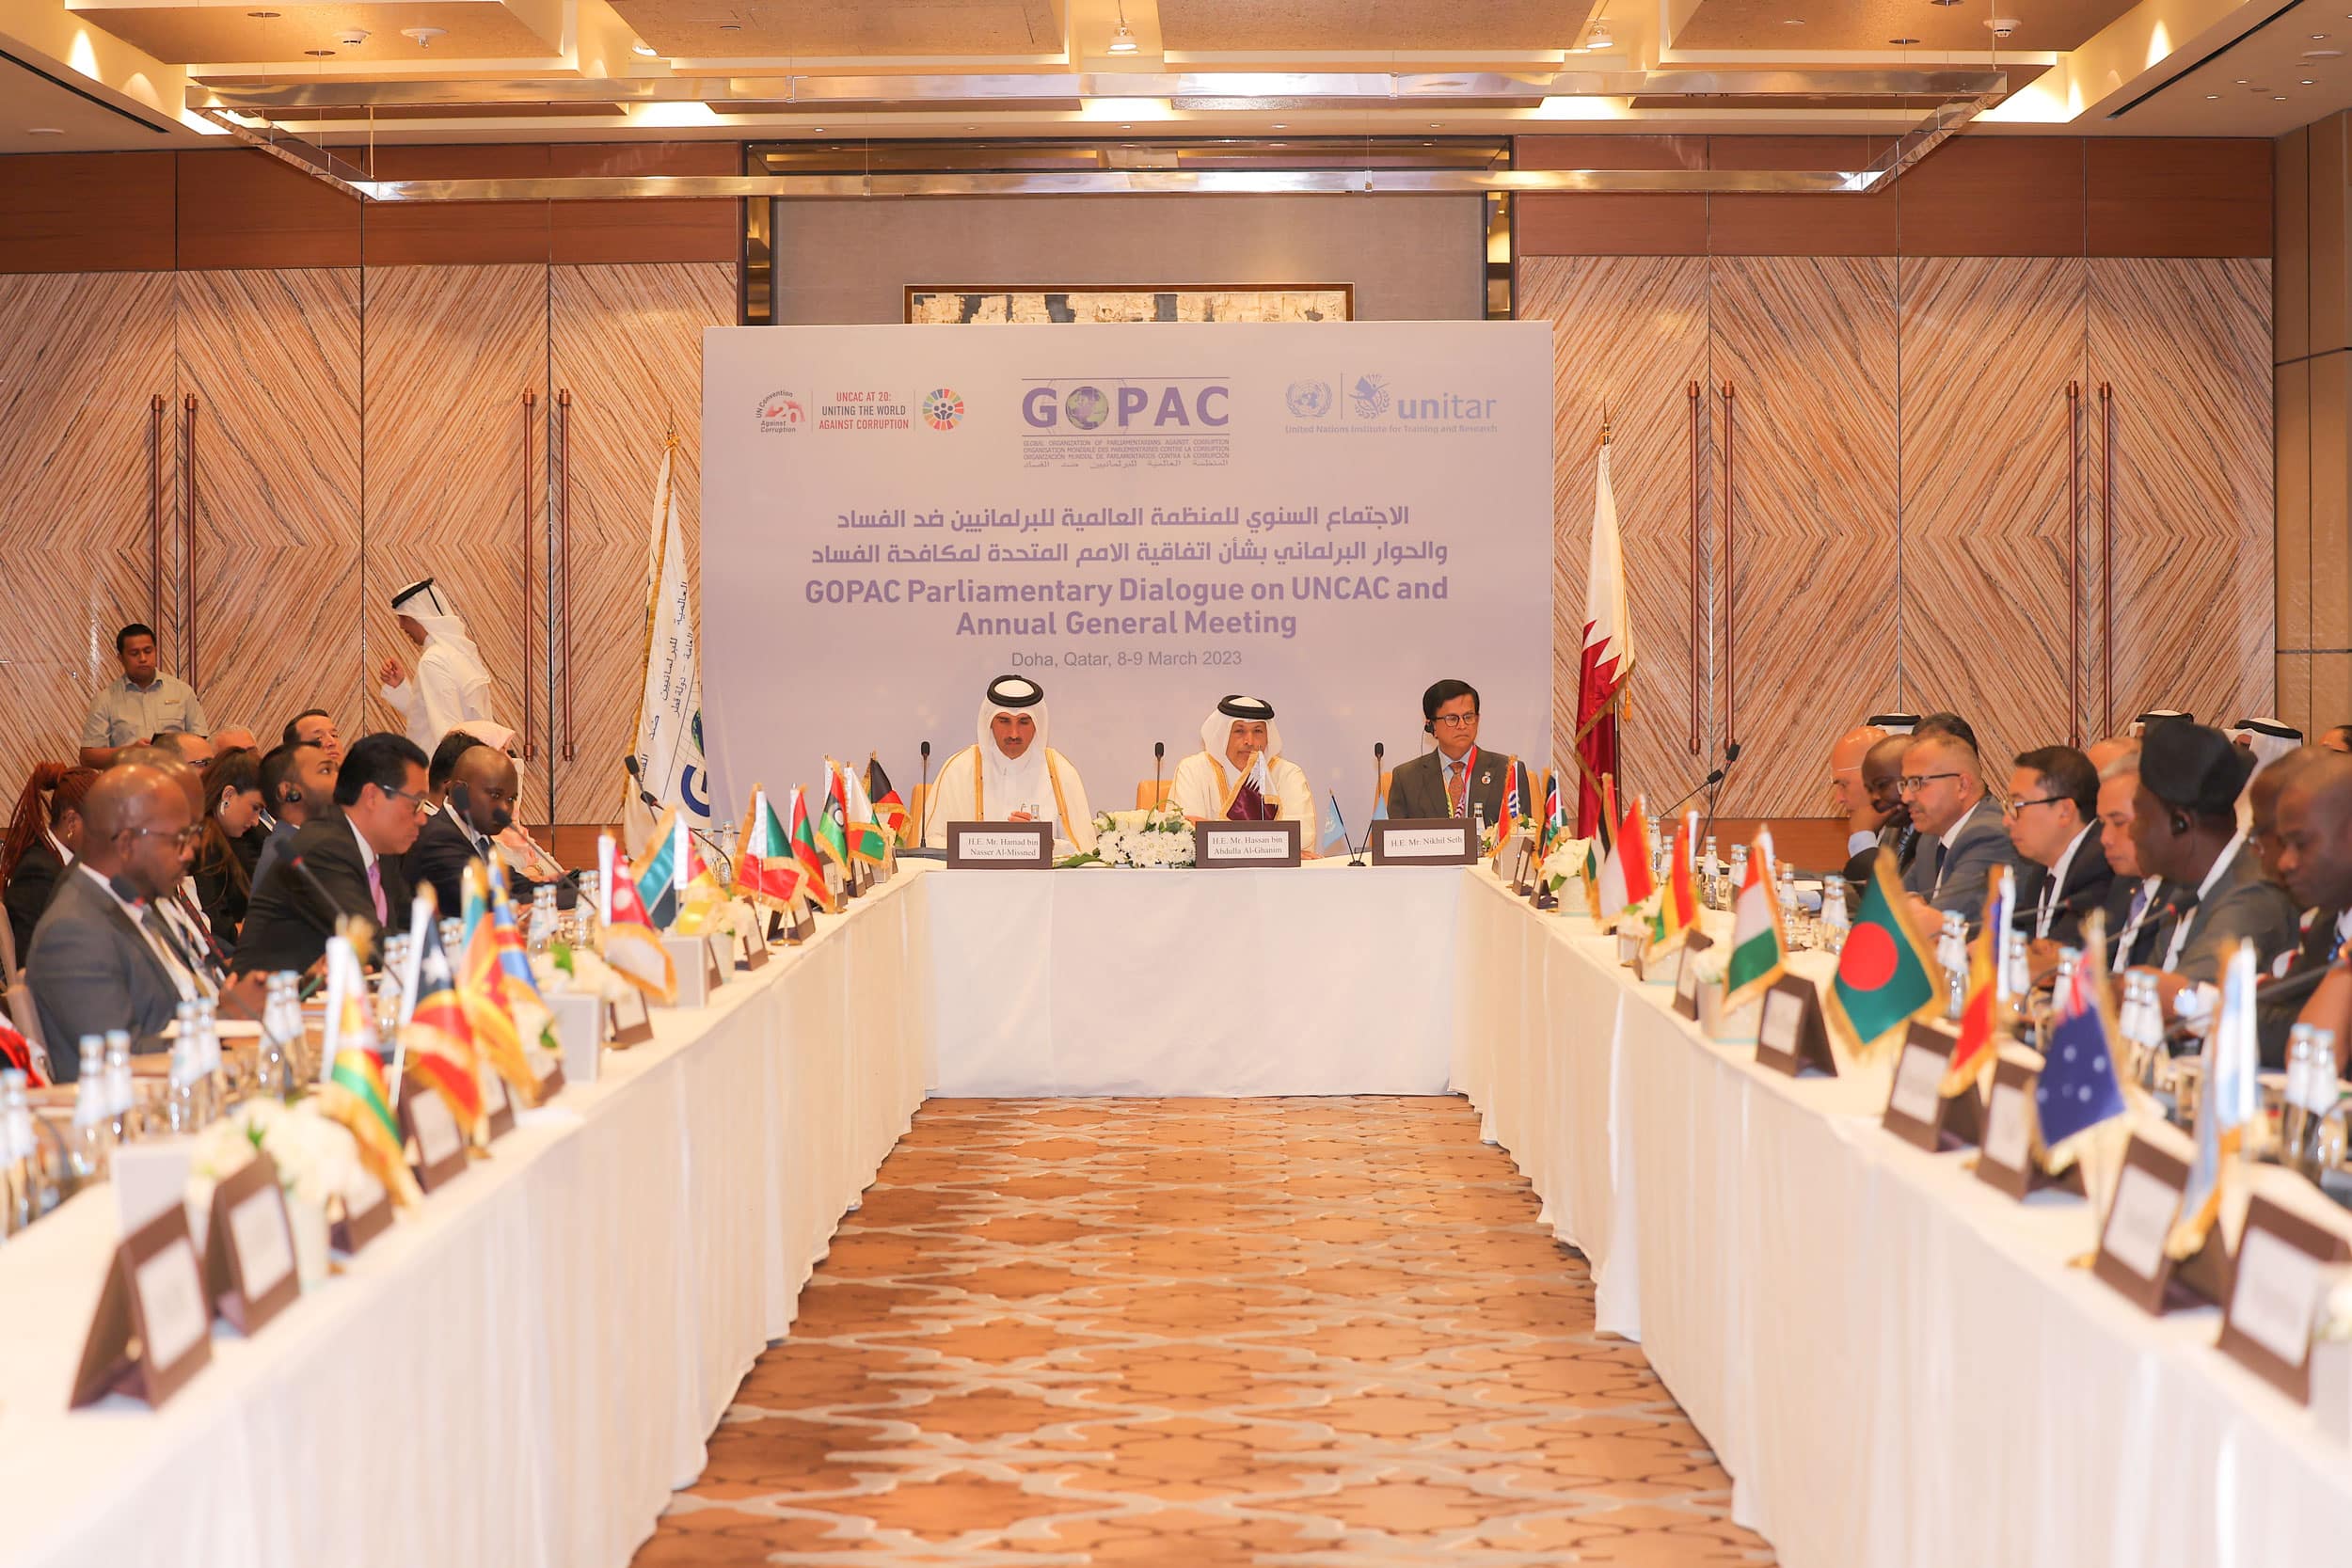 UNODC: GOPAC is the only entity for Parliamentary Forum at the Conference of the State Parties